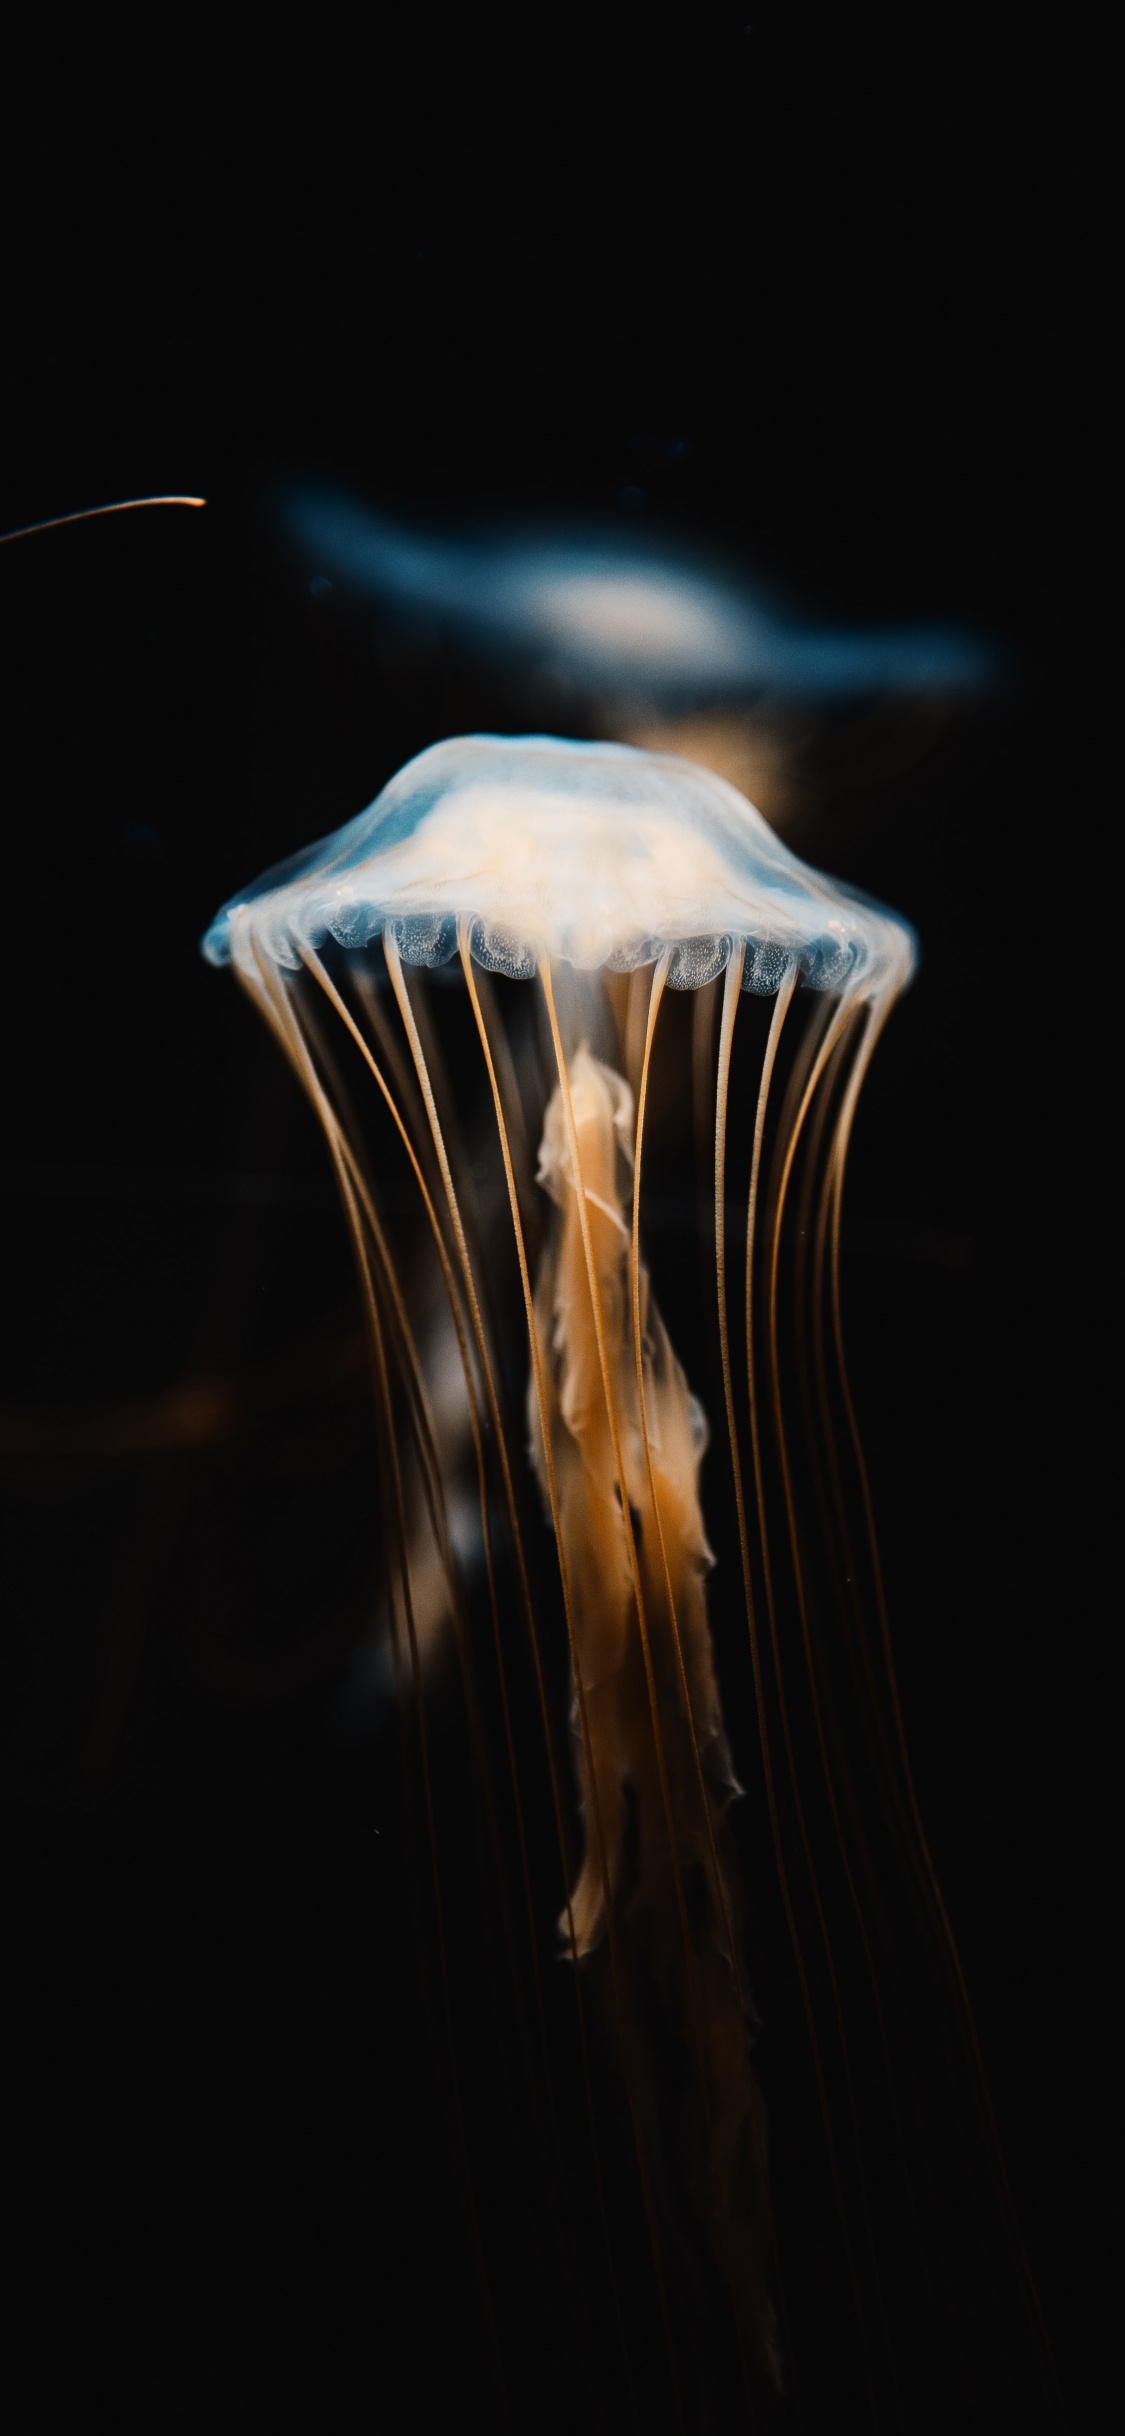 Blue and White Jellyfish in Dark Room. Wallpaper in 1125x2436 Resolution